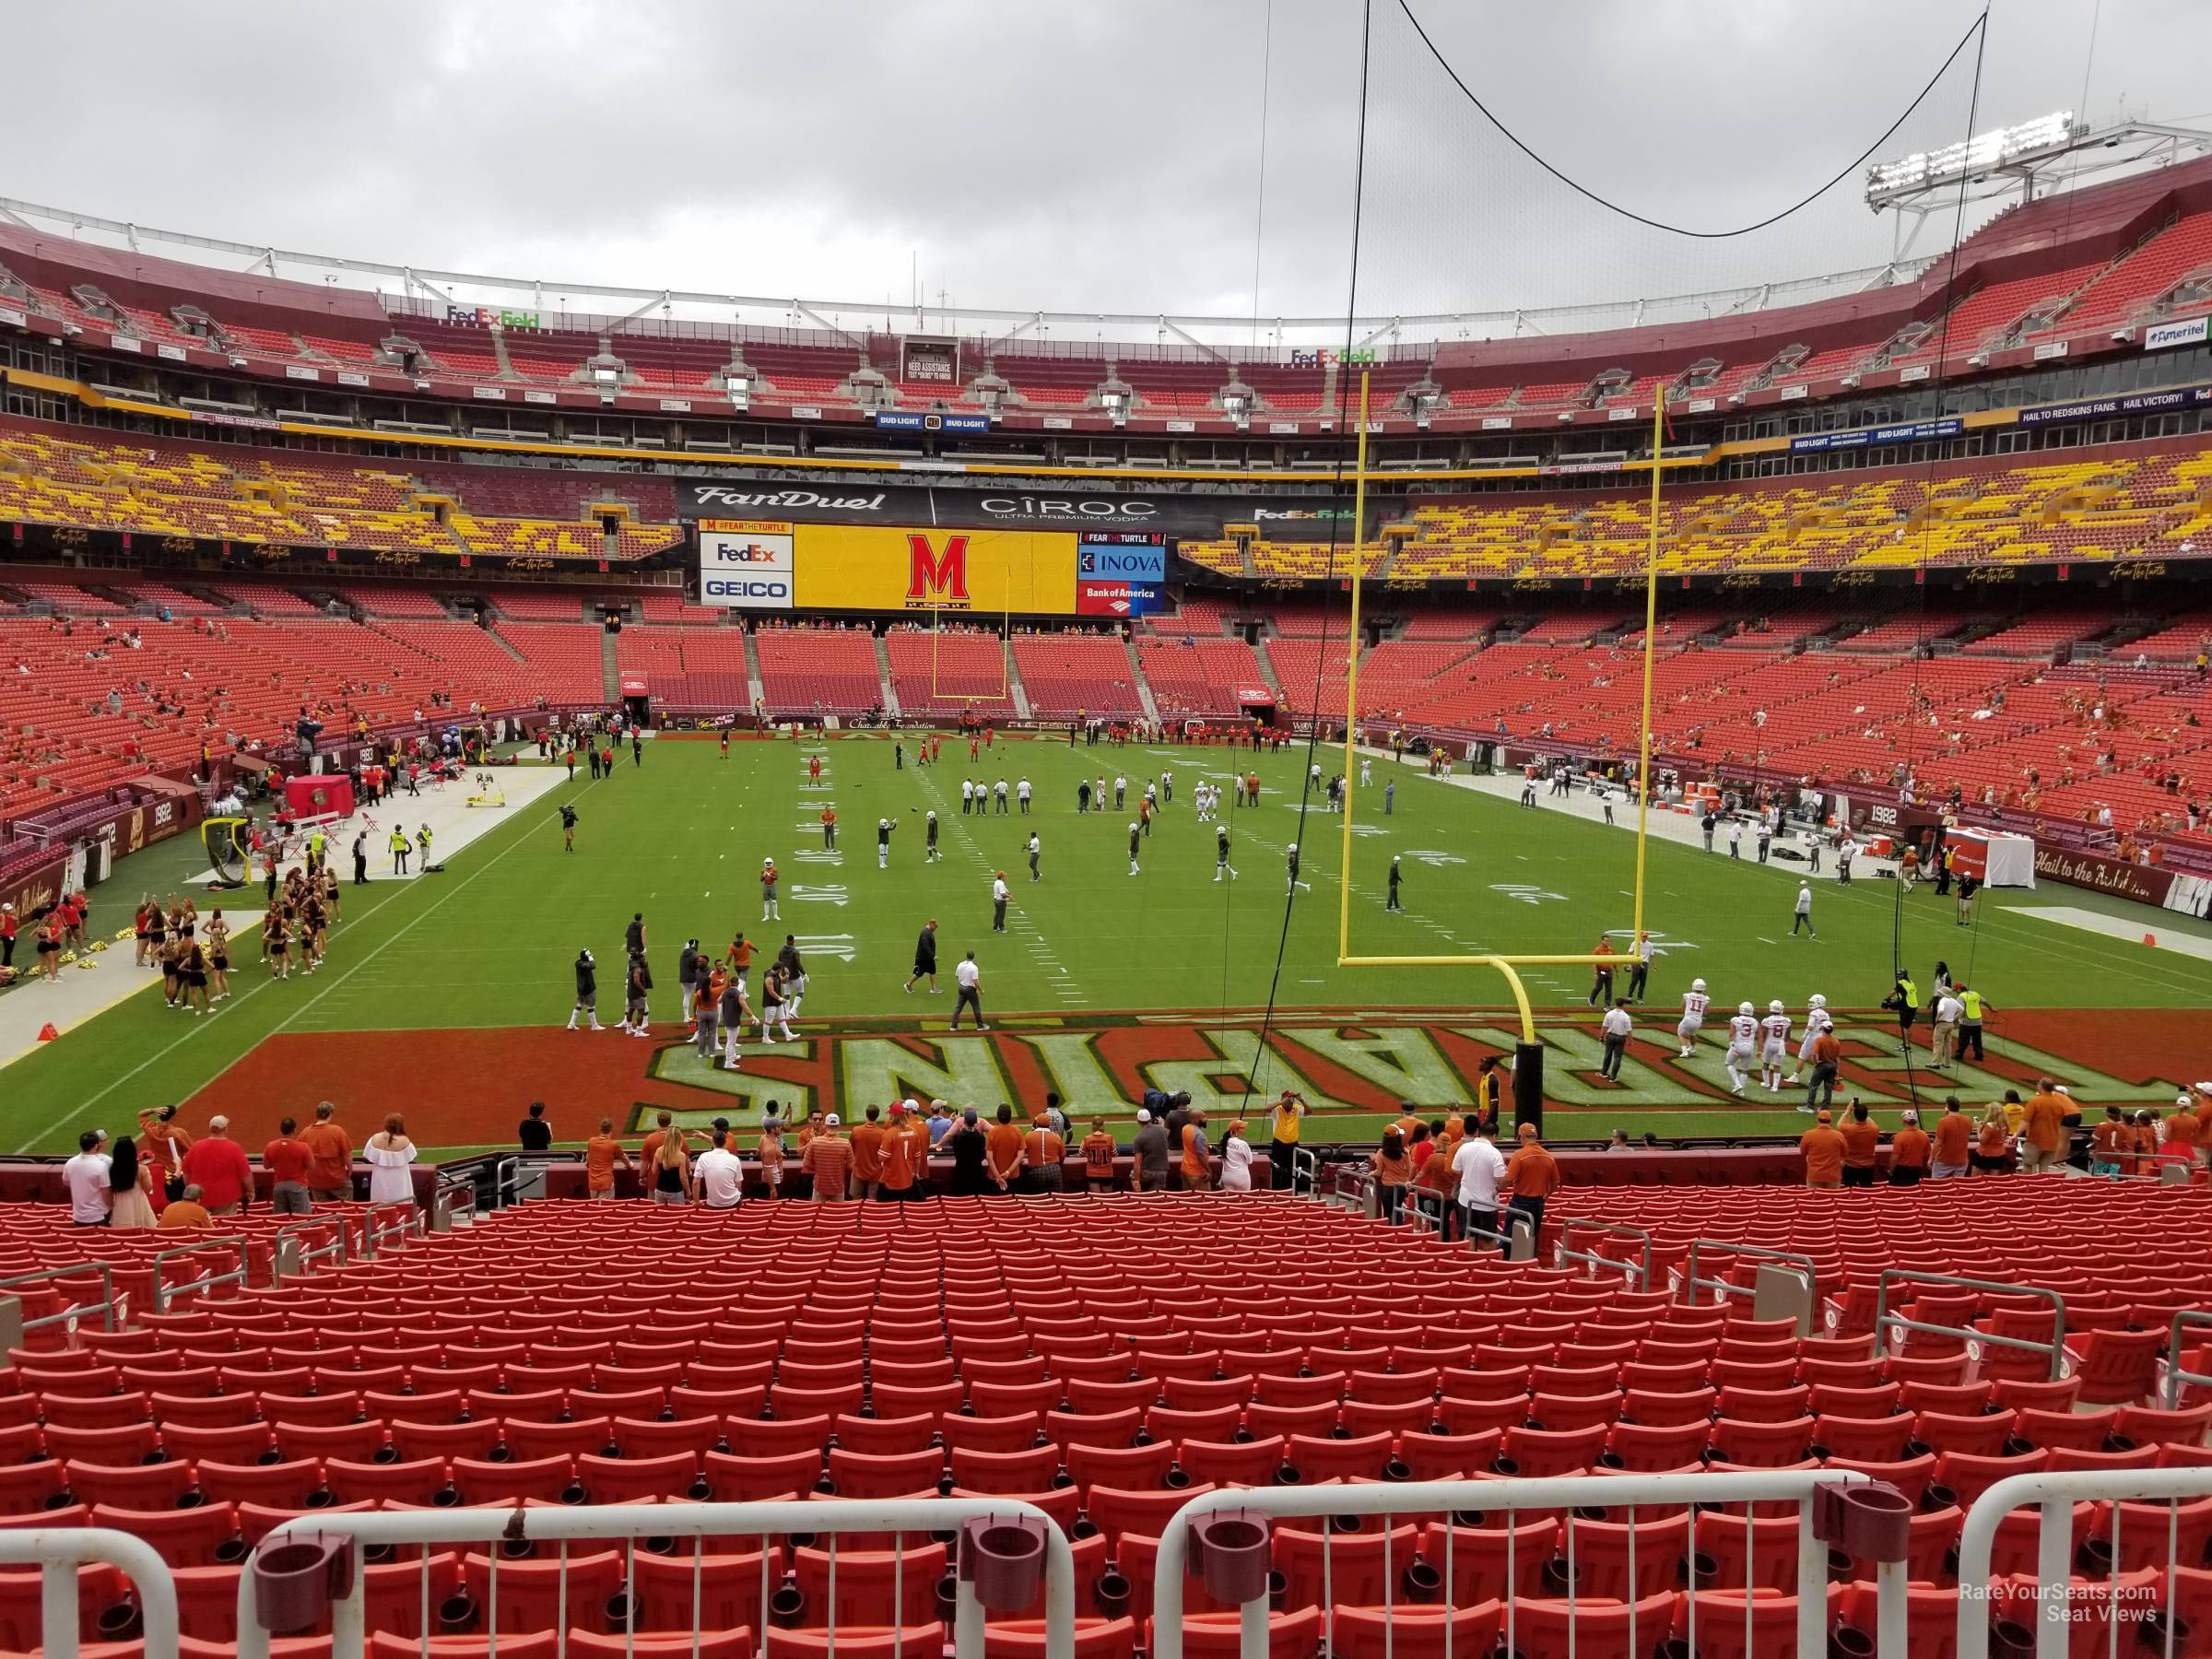 section 233, row 1 seat view  - fedexfield